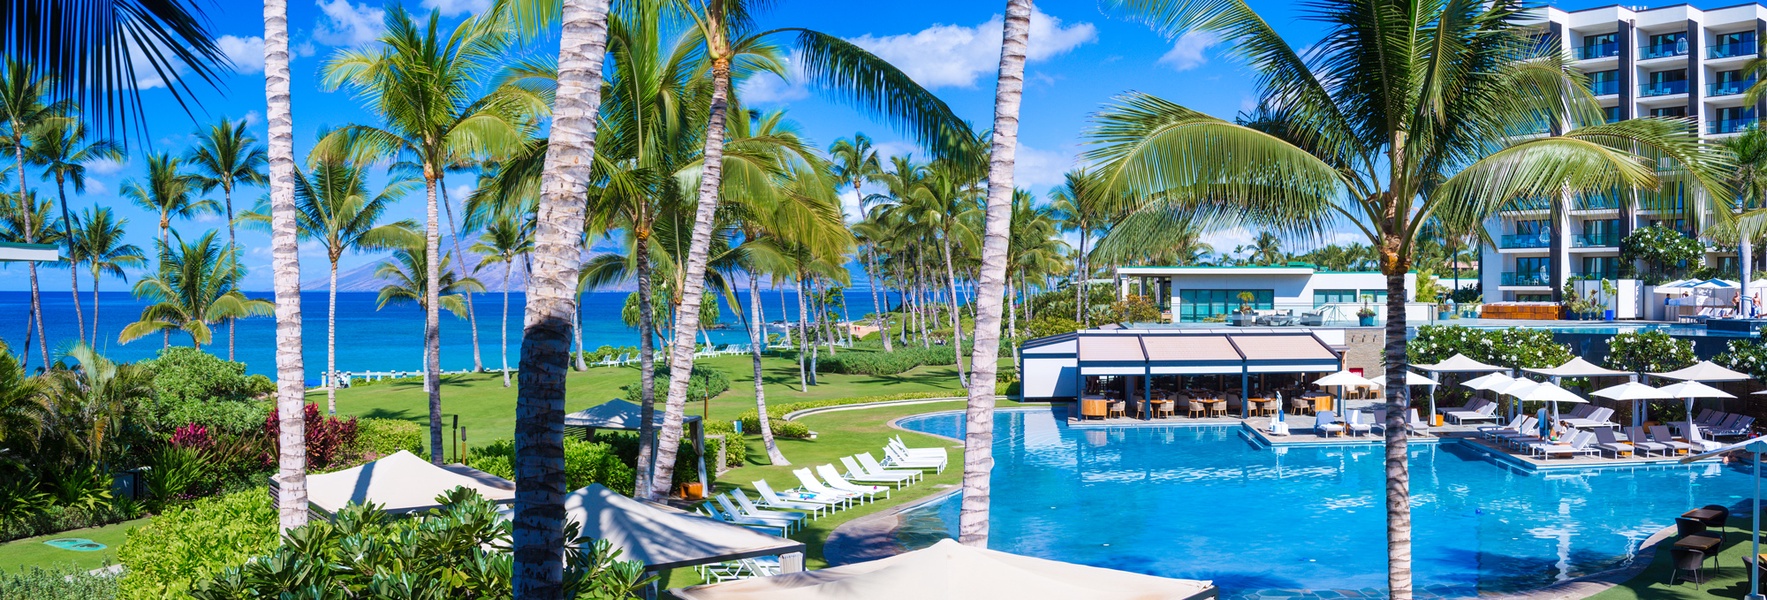 Pool-to-ocean Expansive Views From Your Own Private Lanai